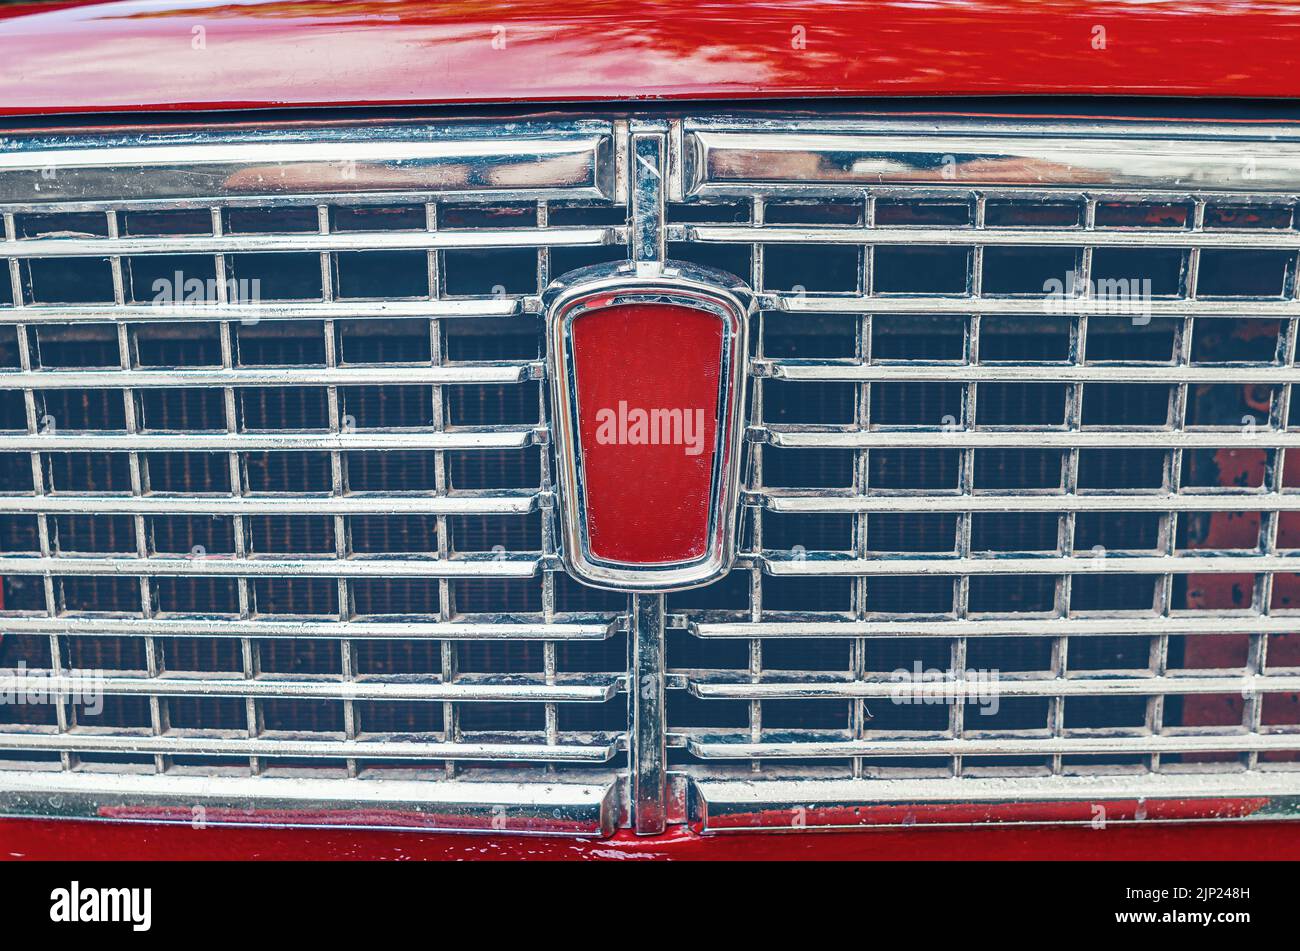 Сlose-up photo of front grille of bright red Soviet retro car. The front of old red Lada car. Stock Photo